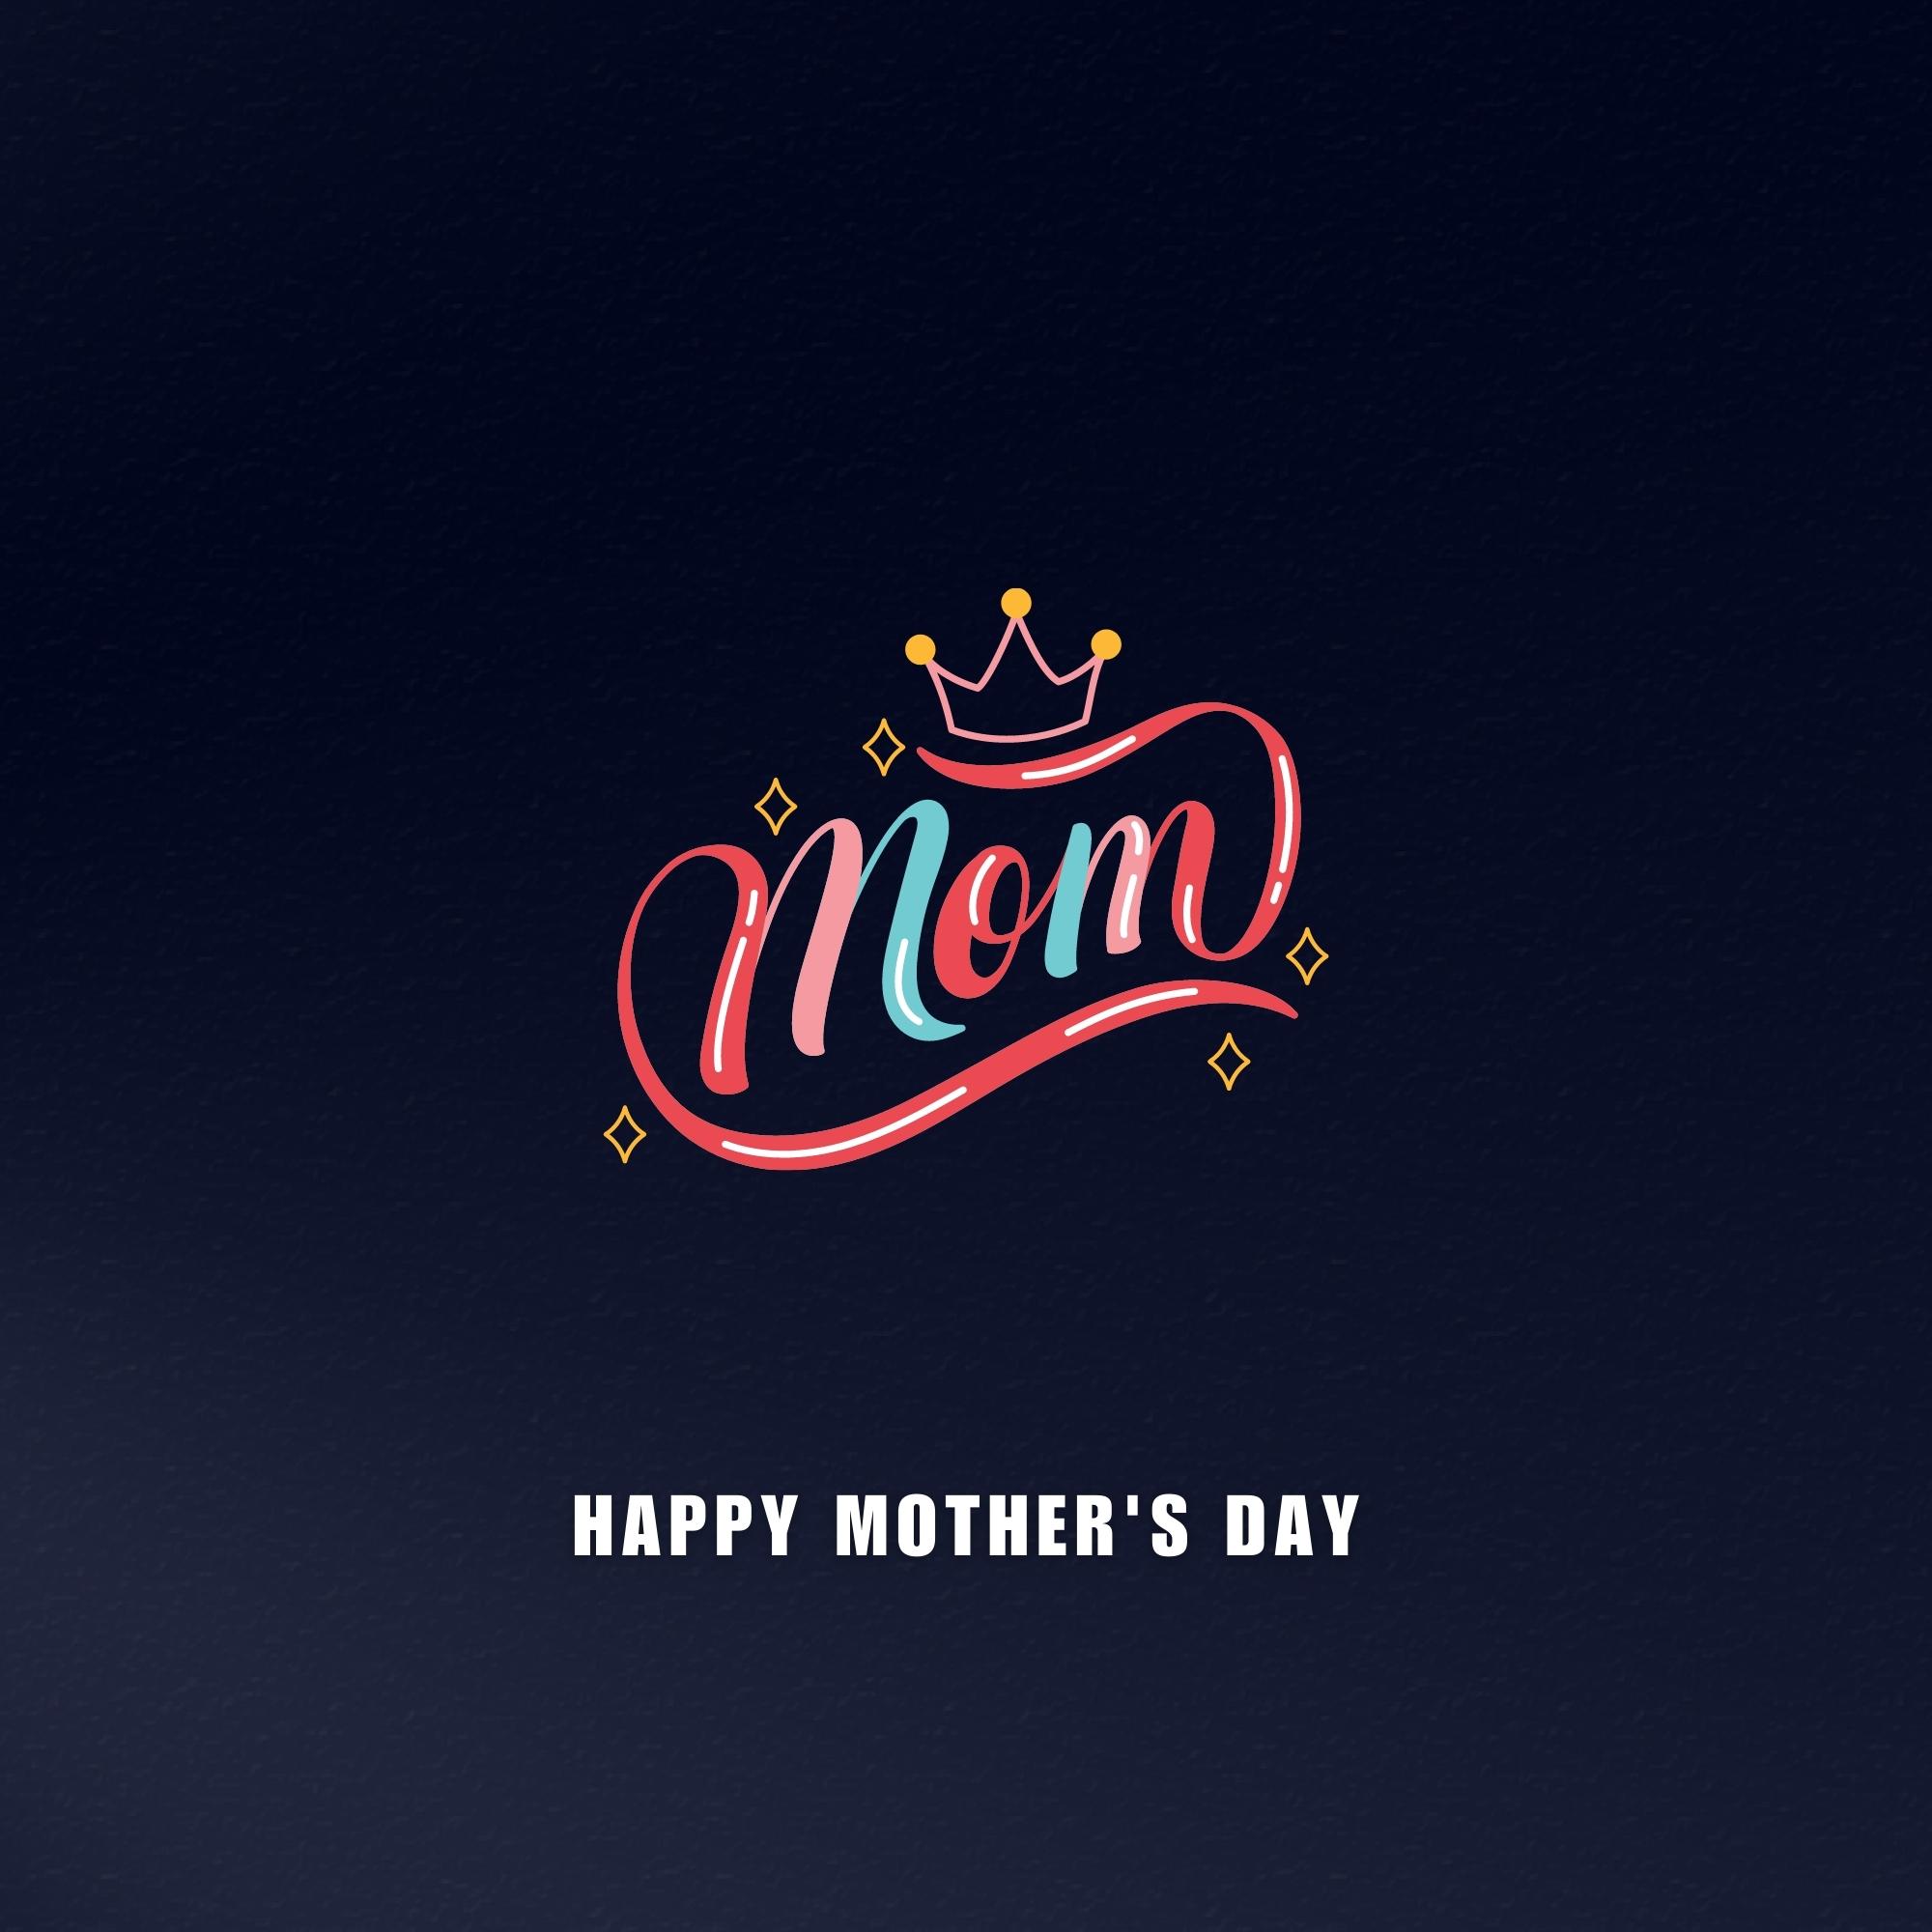 Happy Mothers Day Images | 1002 | Free Download [8k,4k,Hd]